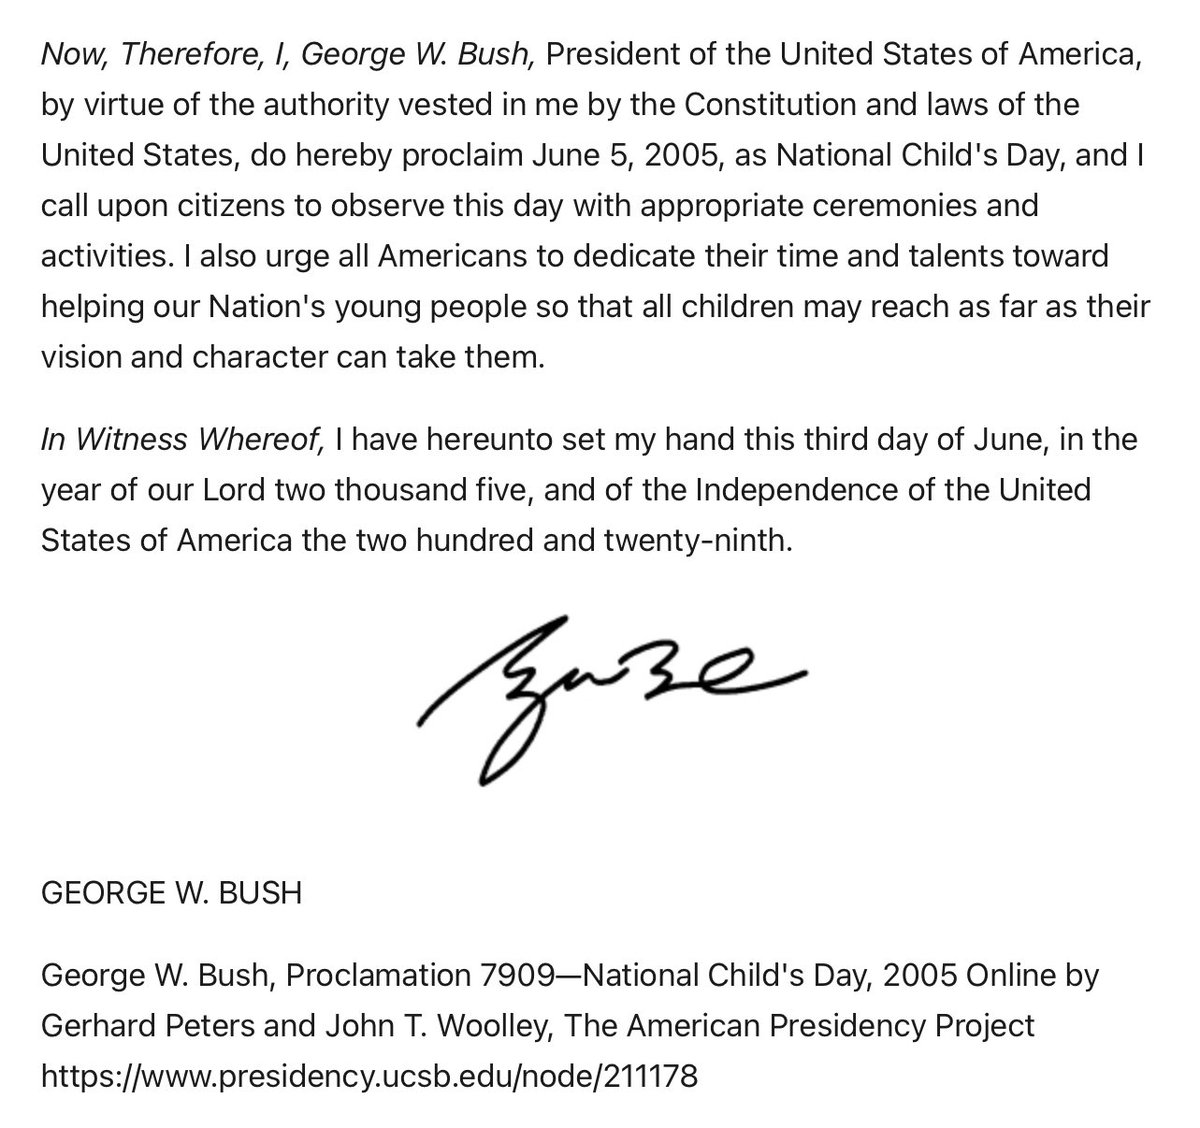 @JoeBiden @POTUS @WhiteHouse @KamalaHarris @VP @WhiteHouseOPE46 President George W. Bush did so when he was president. It is past time to renew and reinvigorate that focus and attention to the best interests and well-being of children in June. #CommitToKids (3)